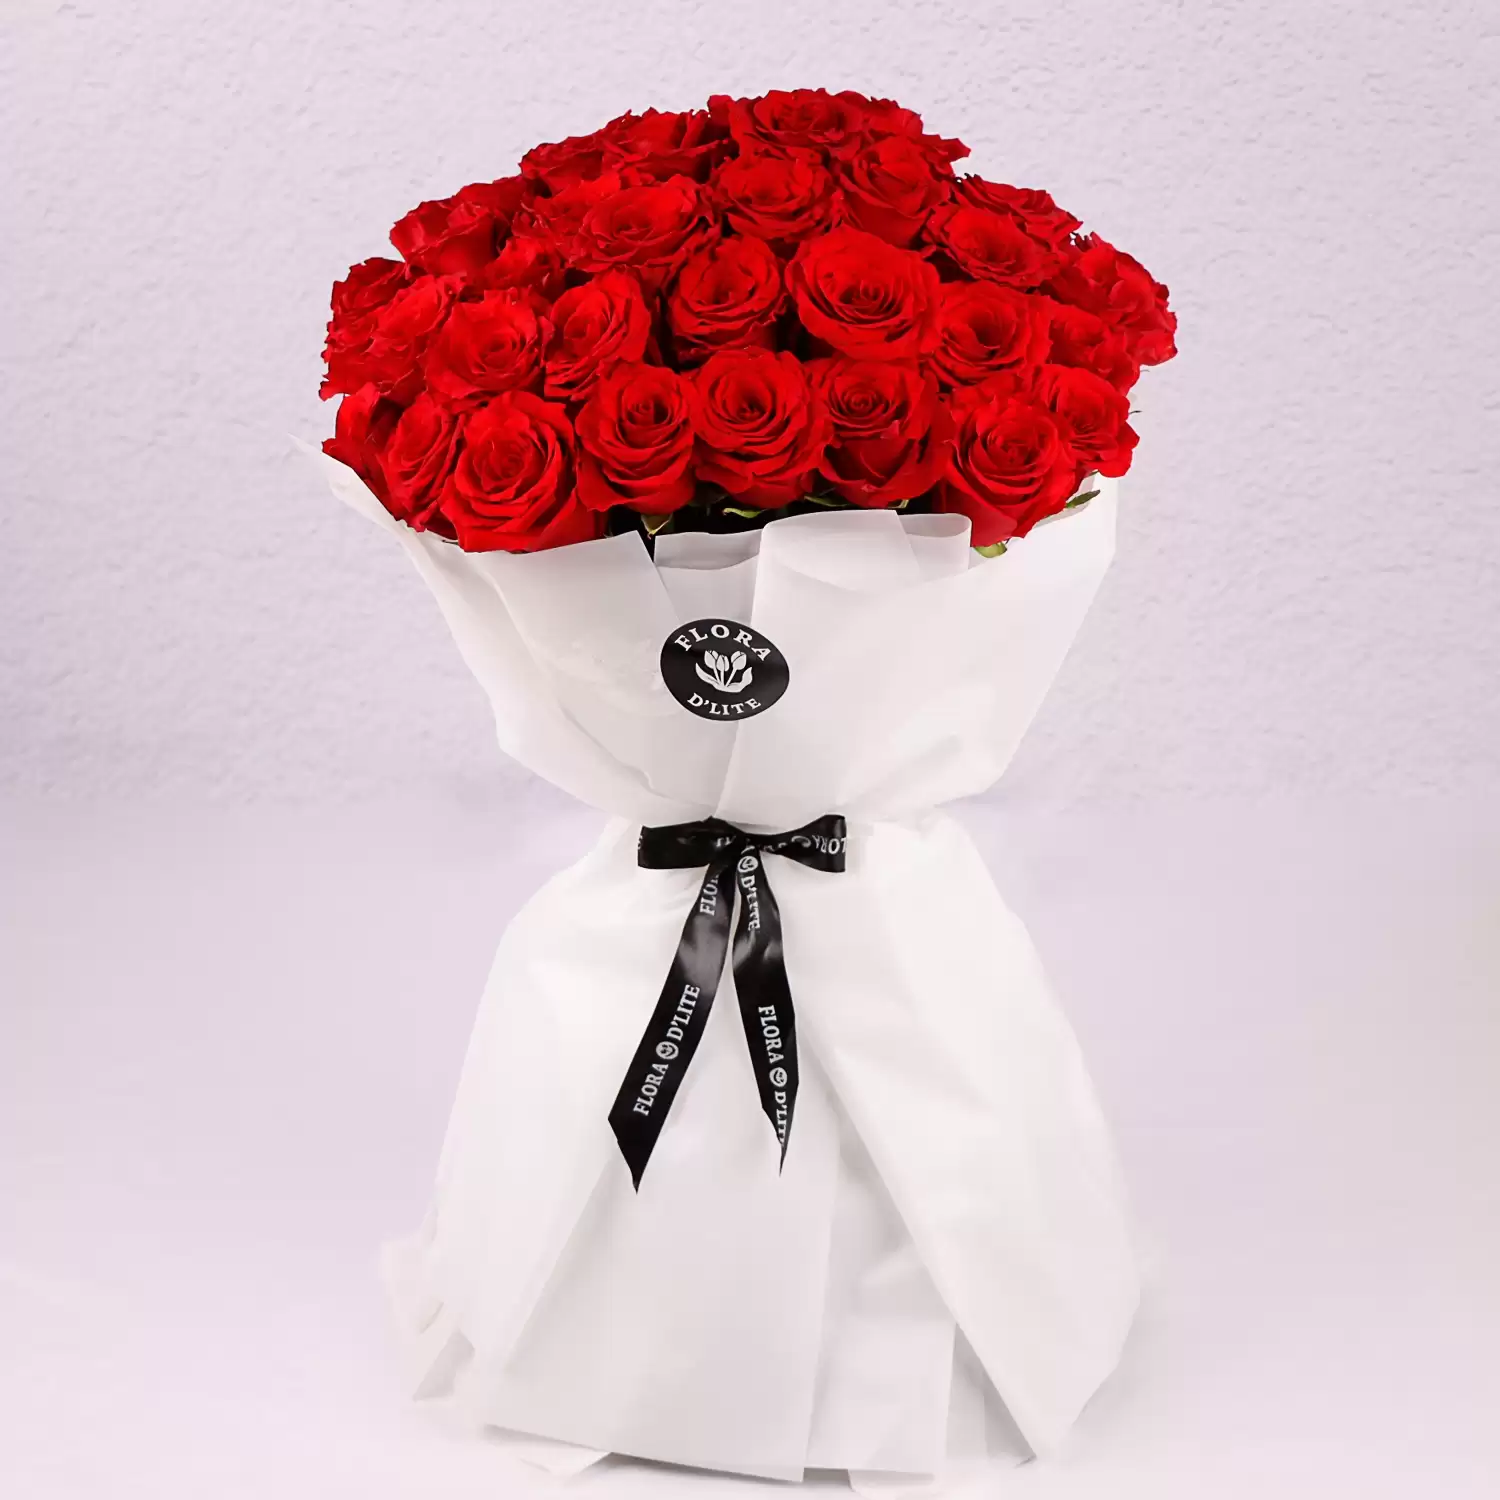 Bouquet of 50 Roses | Gift Roses For Anniversary | Flowers Delivery Bahrain - Flora D'lite